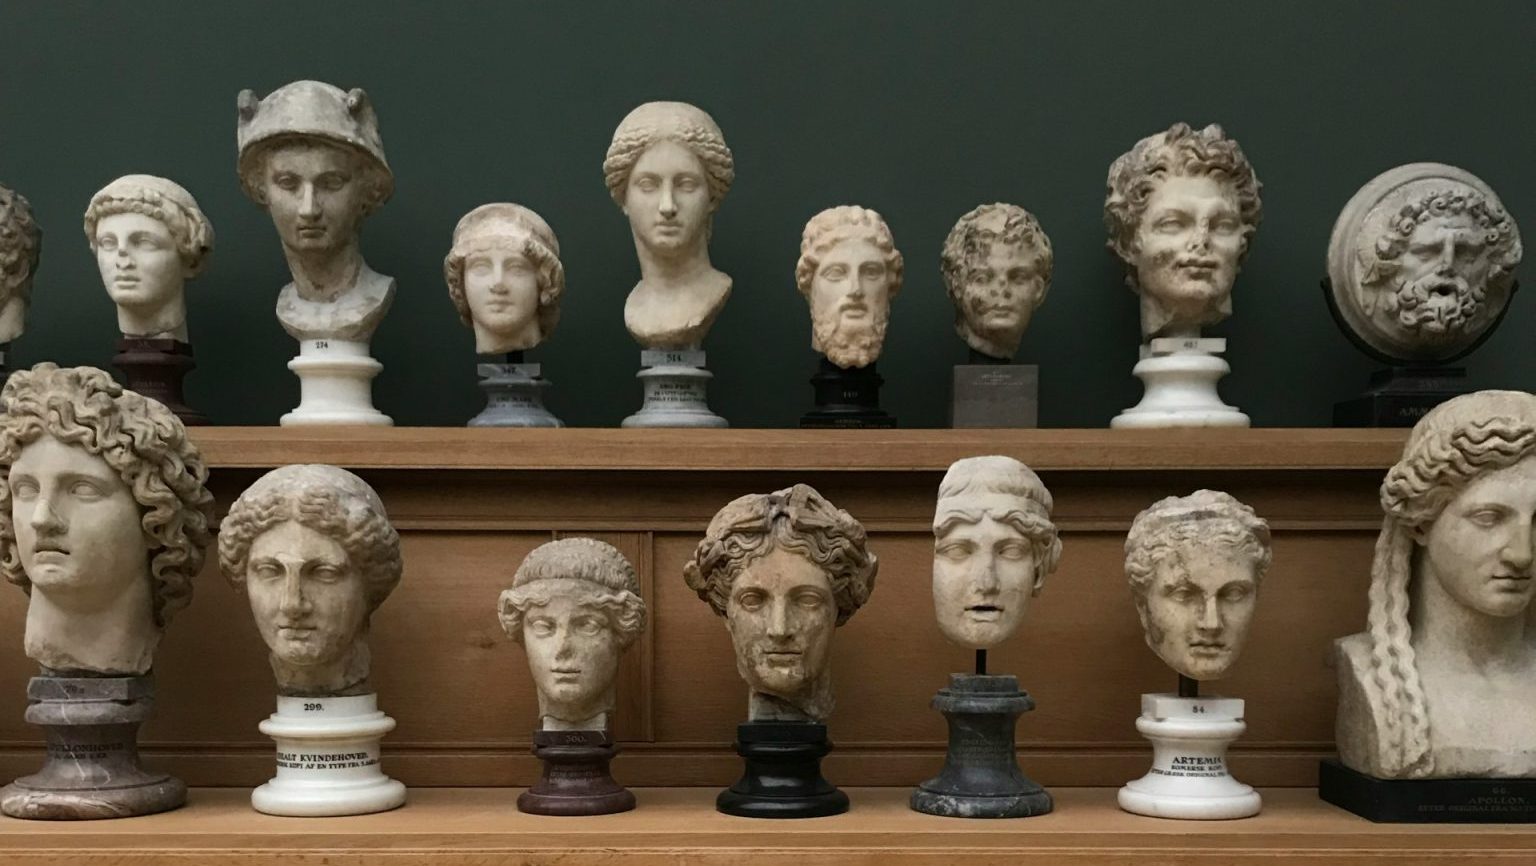 A display of various marble busts and sculptures arranged on two wooden shelves against a dark green wall.